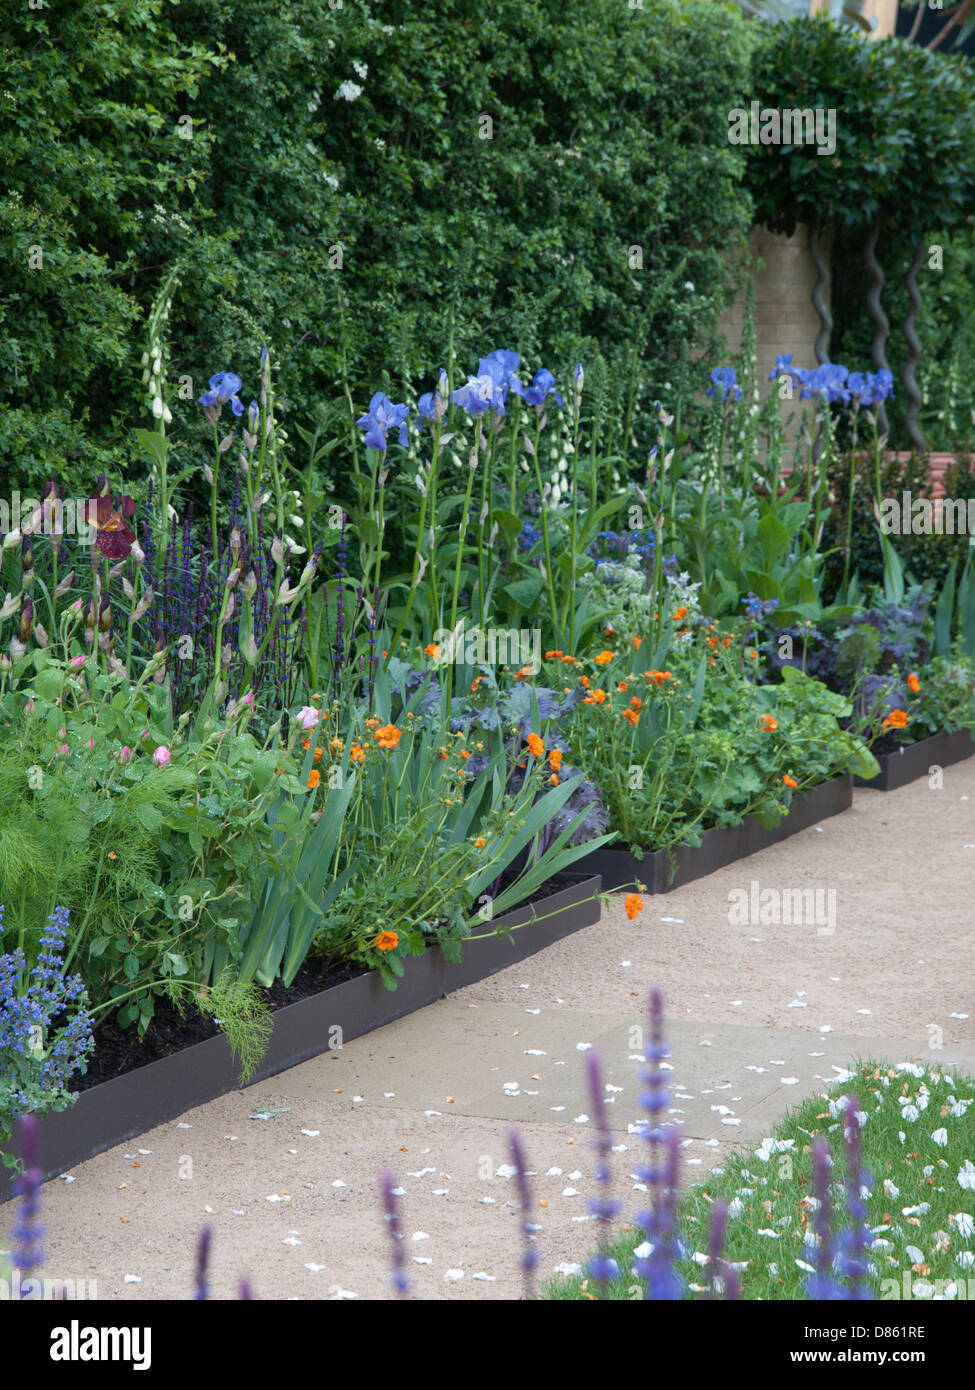 London, UK. 20th  May 2013. The Chelsea Flower Show. Pictured: Thw homebase Garden. London, UK Credit: Ian Thwaites/Alamy Live News Stock Photo